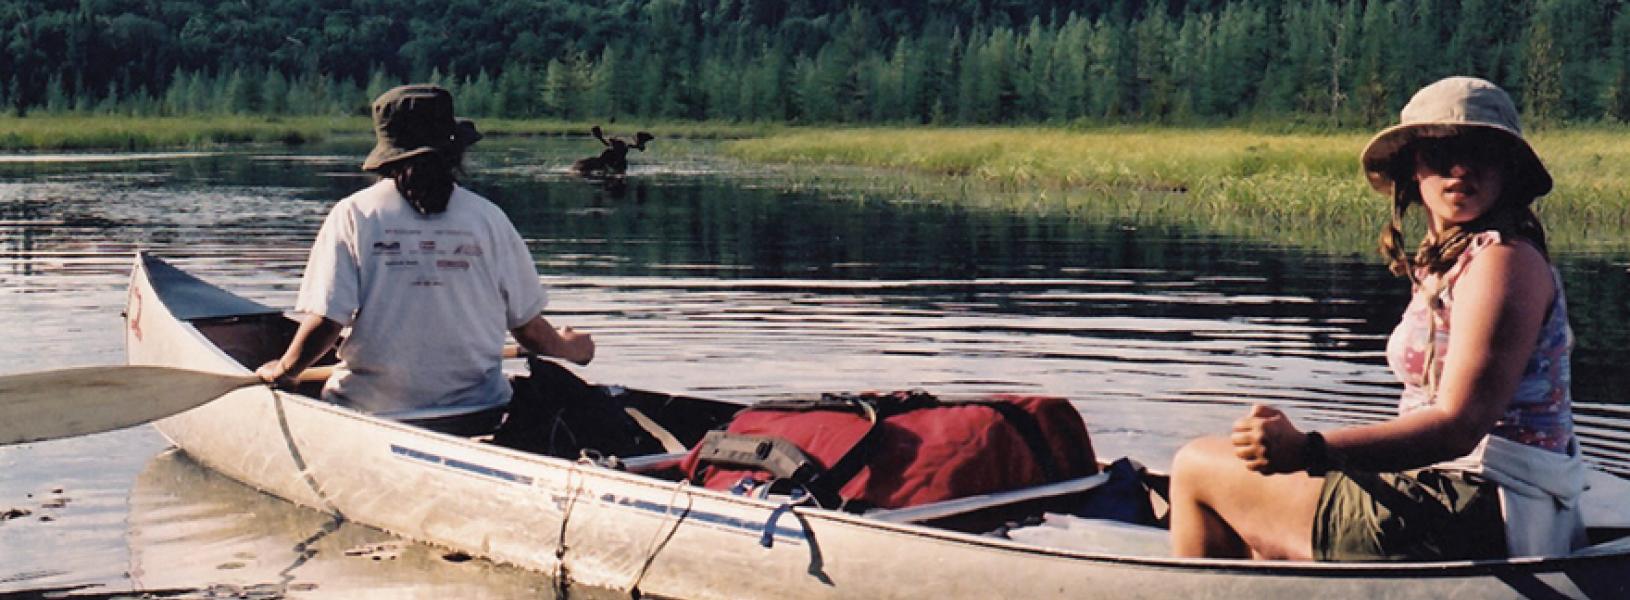 Two students paddle a canoe on a lake lined with evergreen trees.